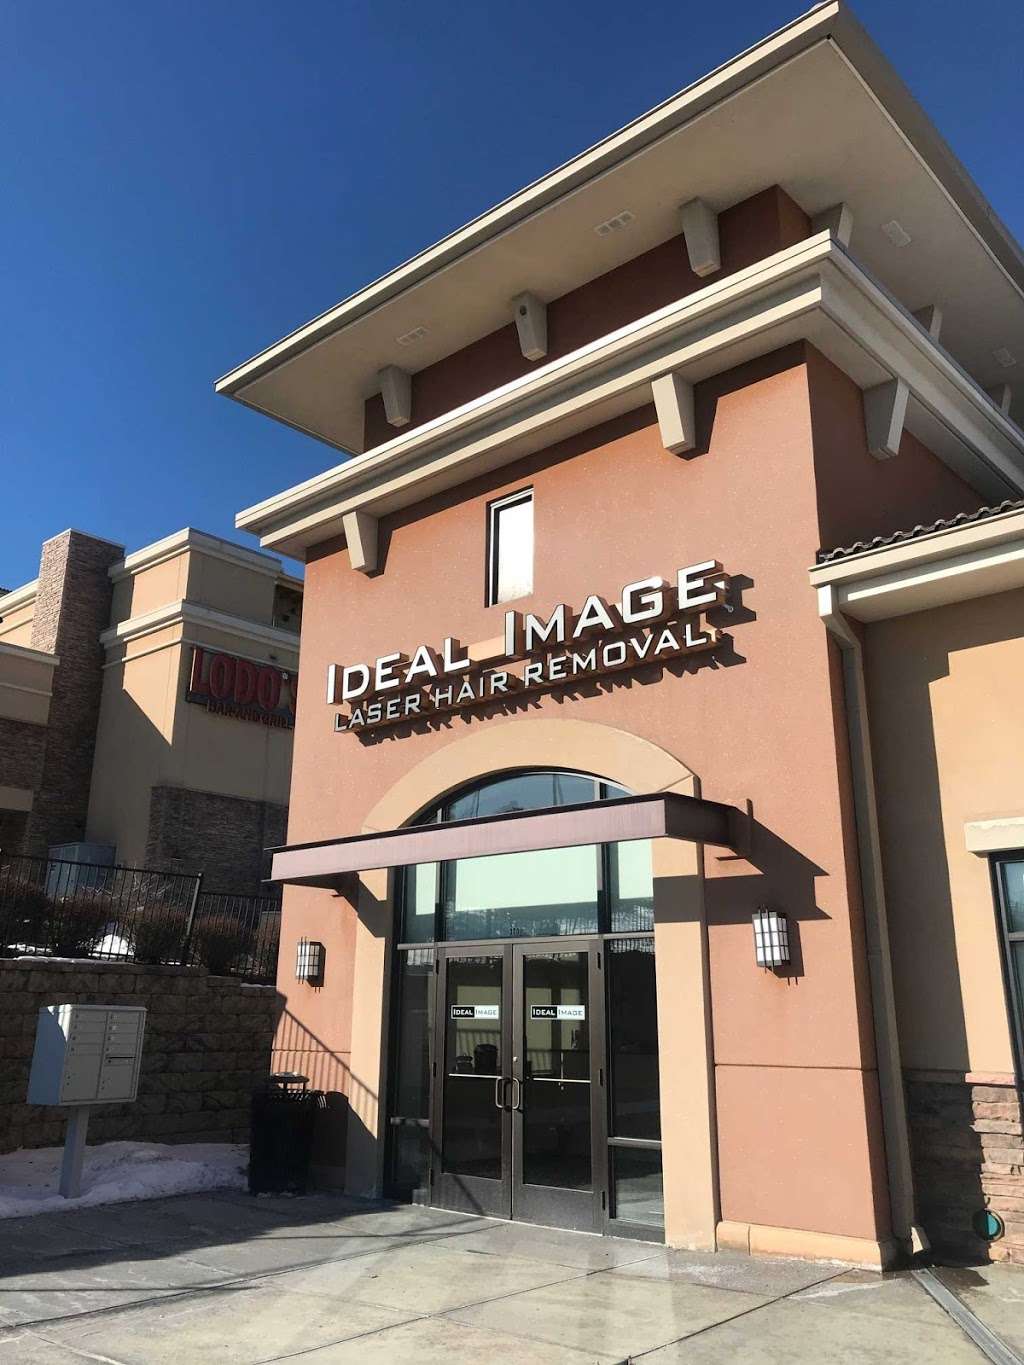 Ideal Image Westminster | 3044 W 105th Ave #300, Westminster, CO 80031 | Phone: (303) 255-6038